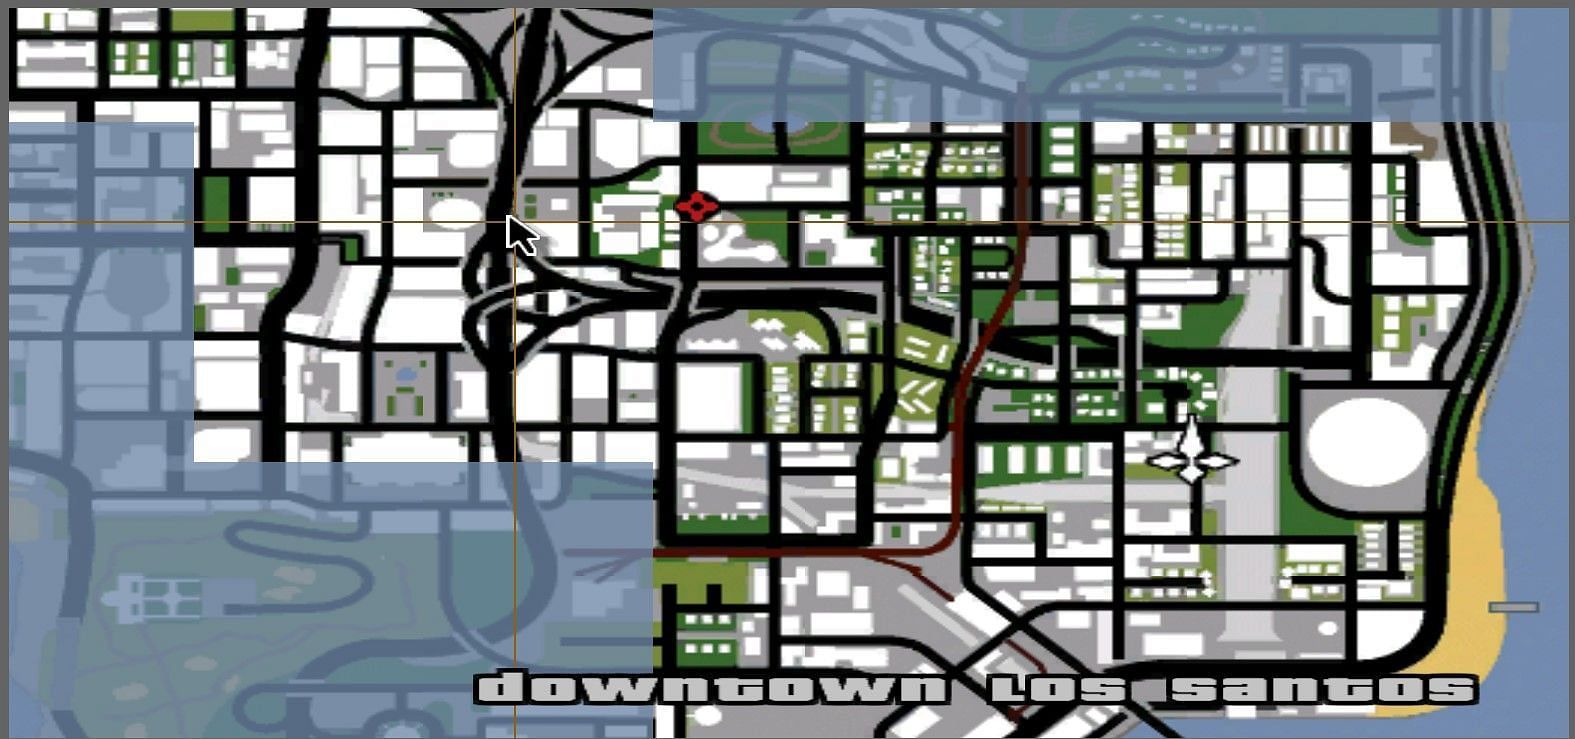 An example of a waypoint in GTA San Andreas (Image via Rockstar Games)